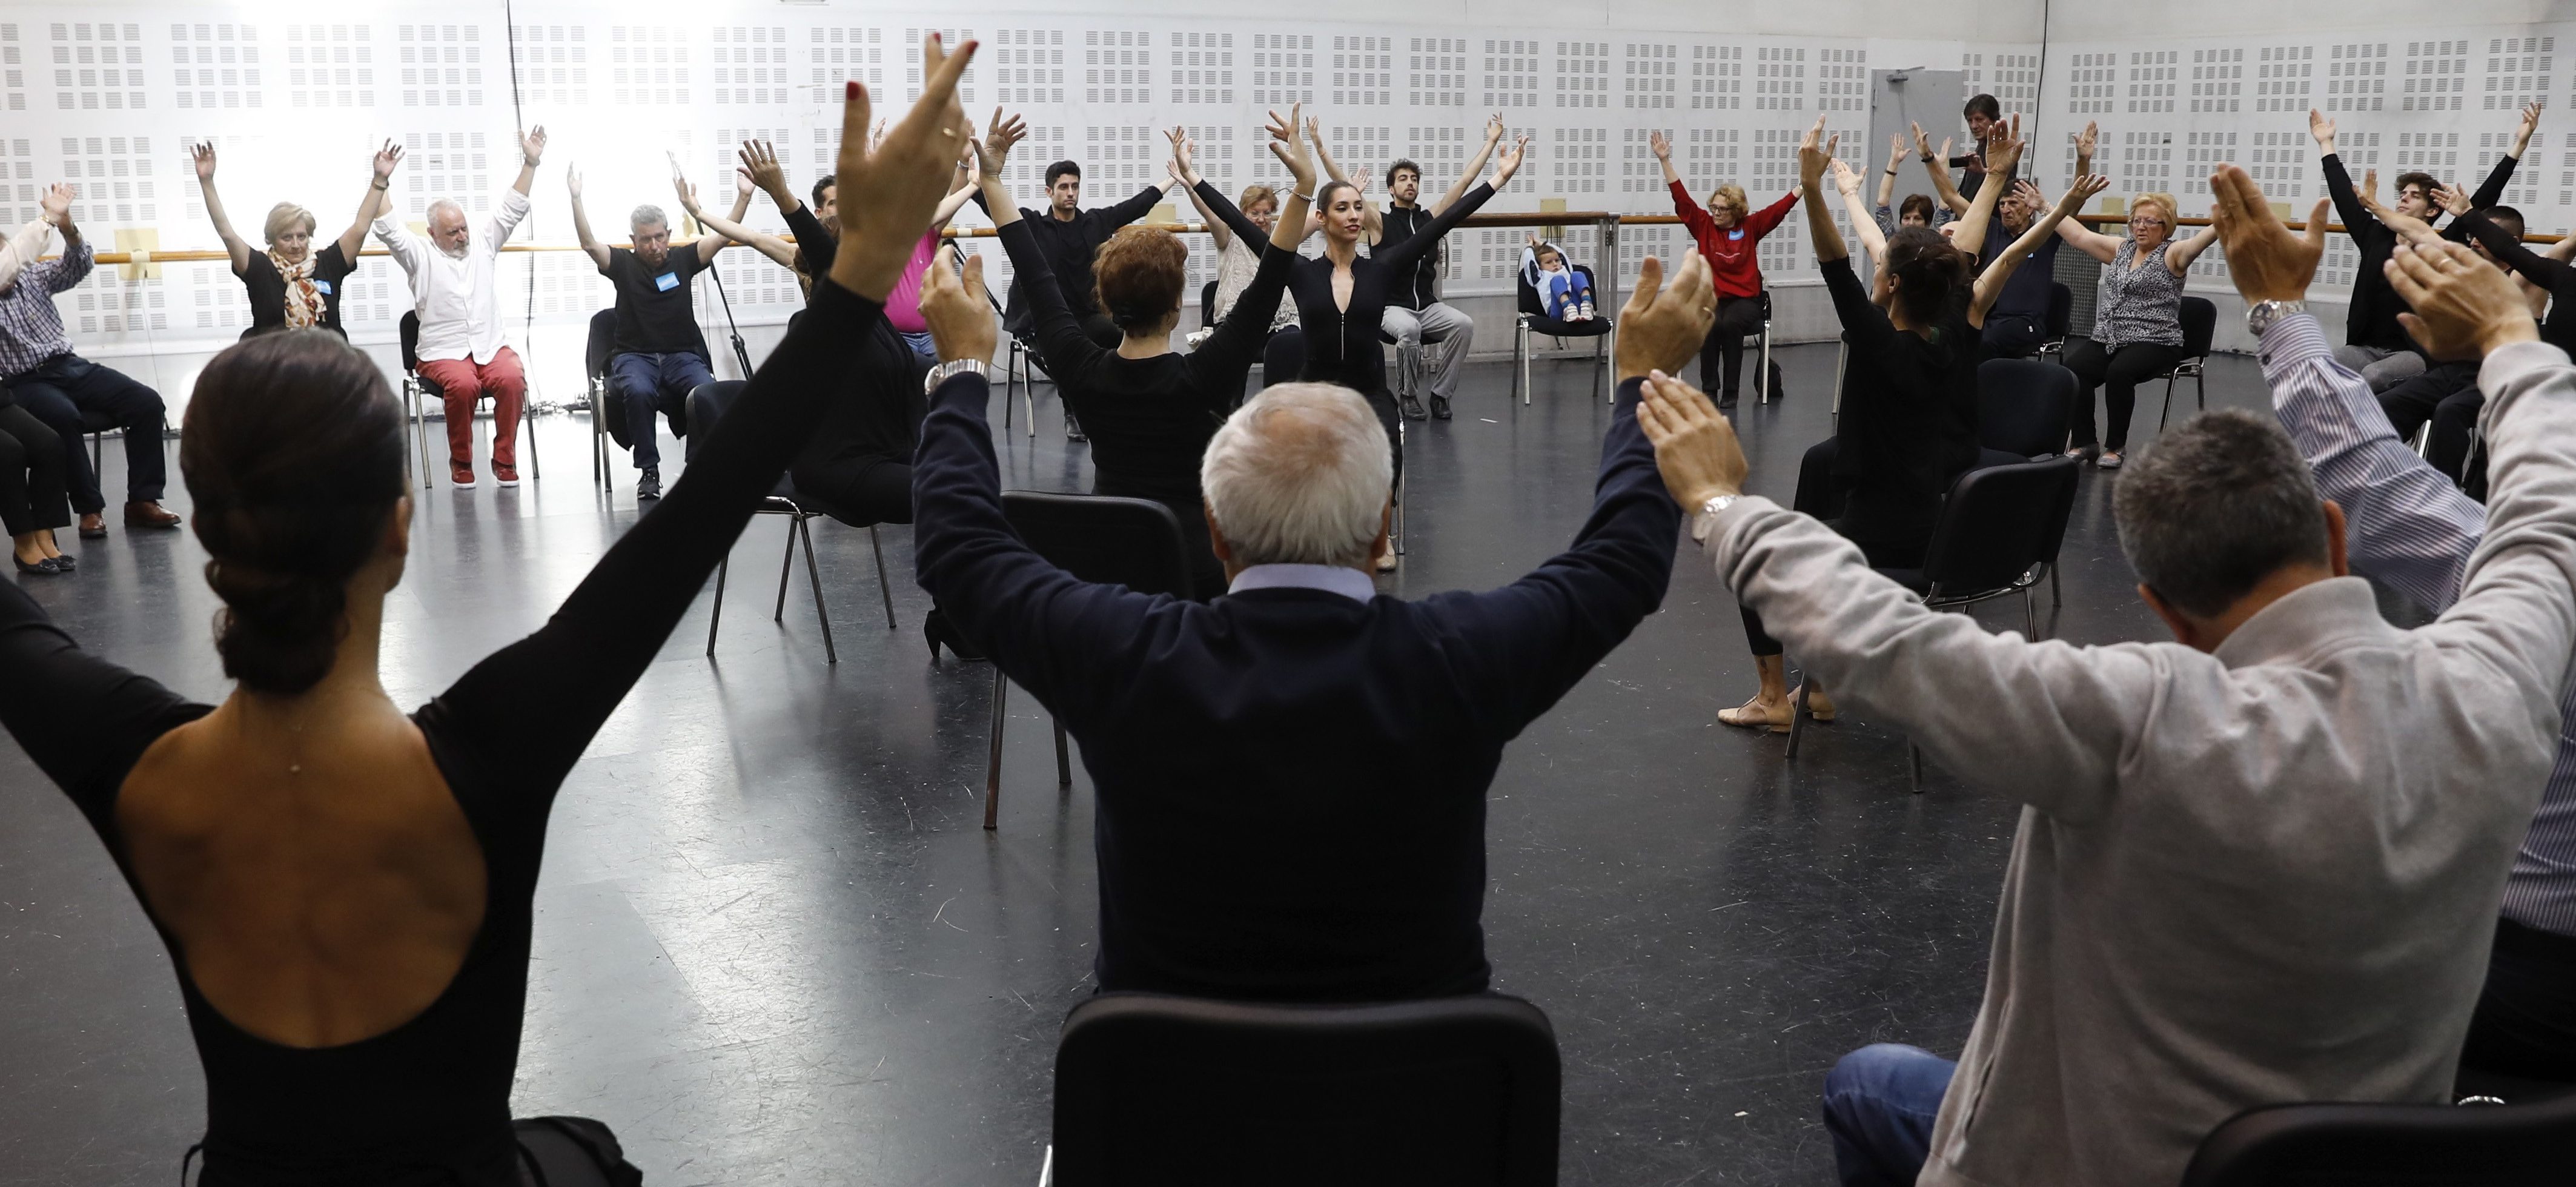 epa05902851 A group of people who suffer Parkinson desease take part at an exercise organized by Spain's National Ballet on the occasion of the World Parkinson's Disease Day, in Madrid, Spain, 11 April 2017. The dance helps them with the coordination and the balance of their bodies. EPA/Ballesteros